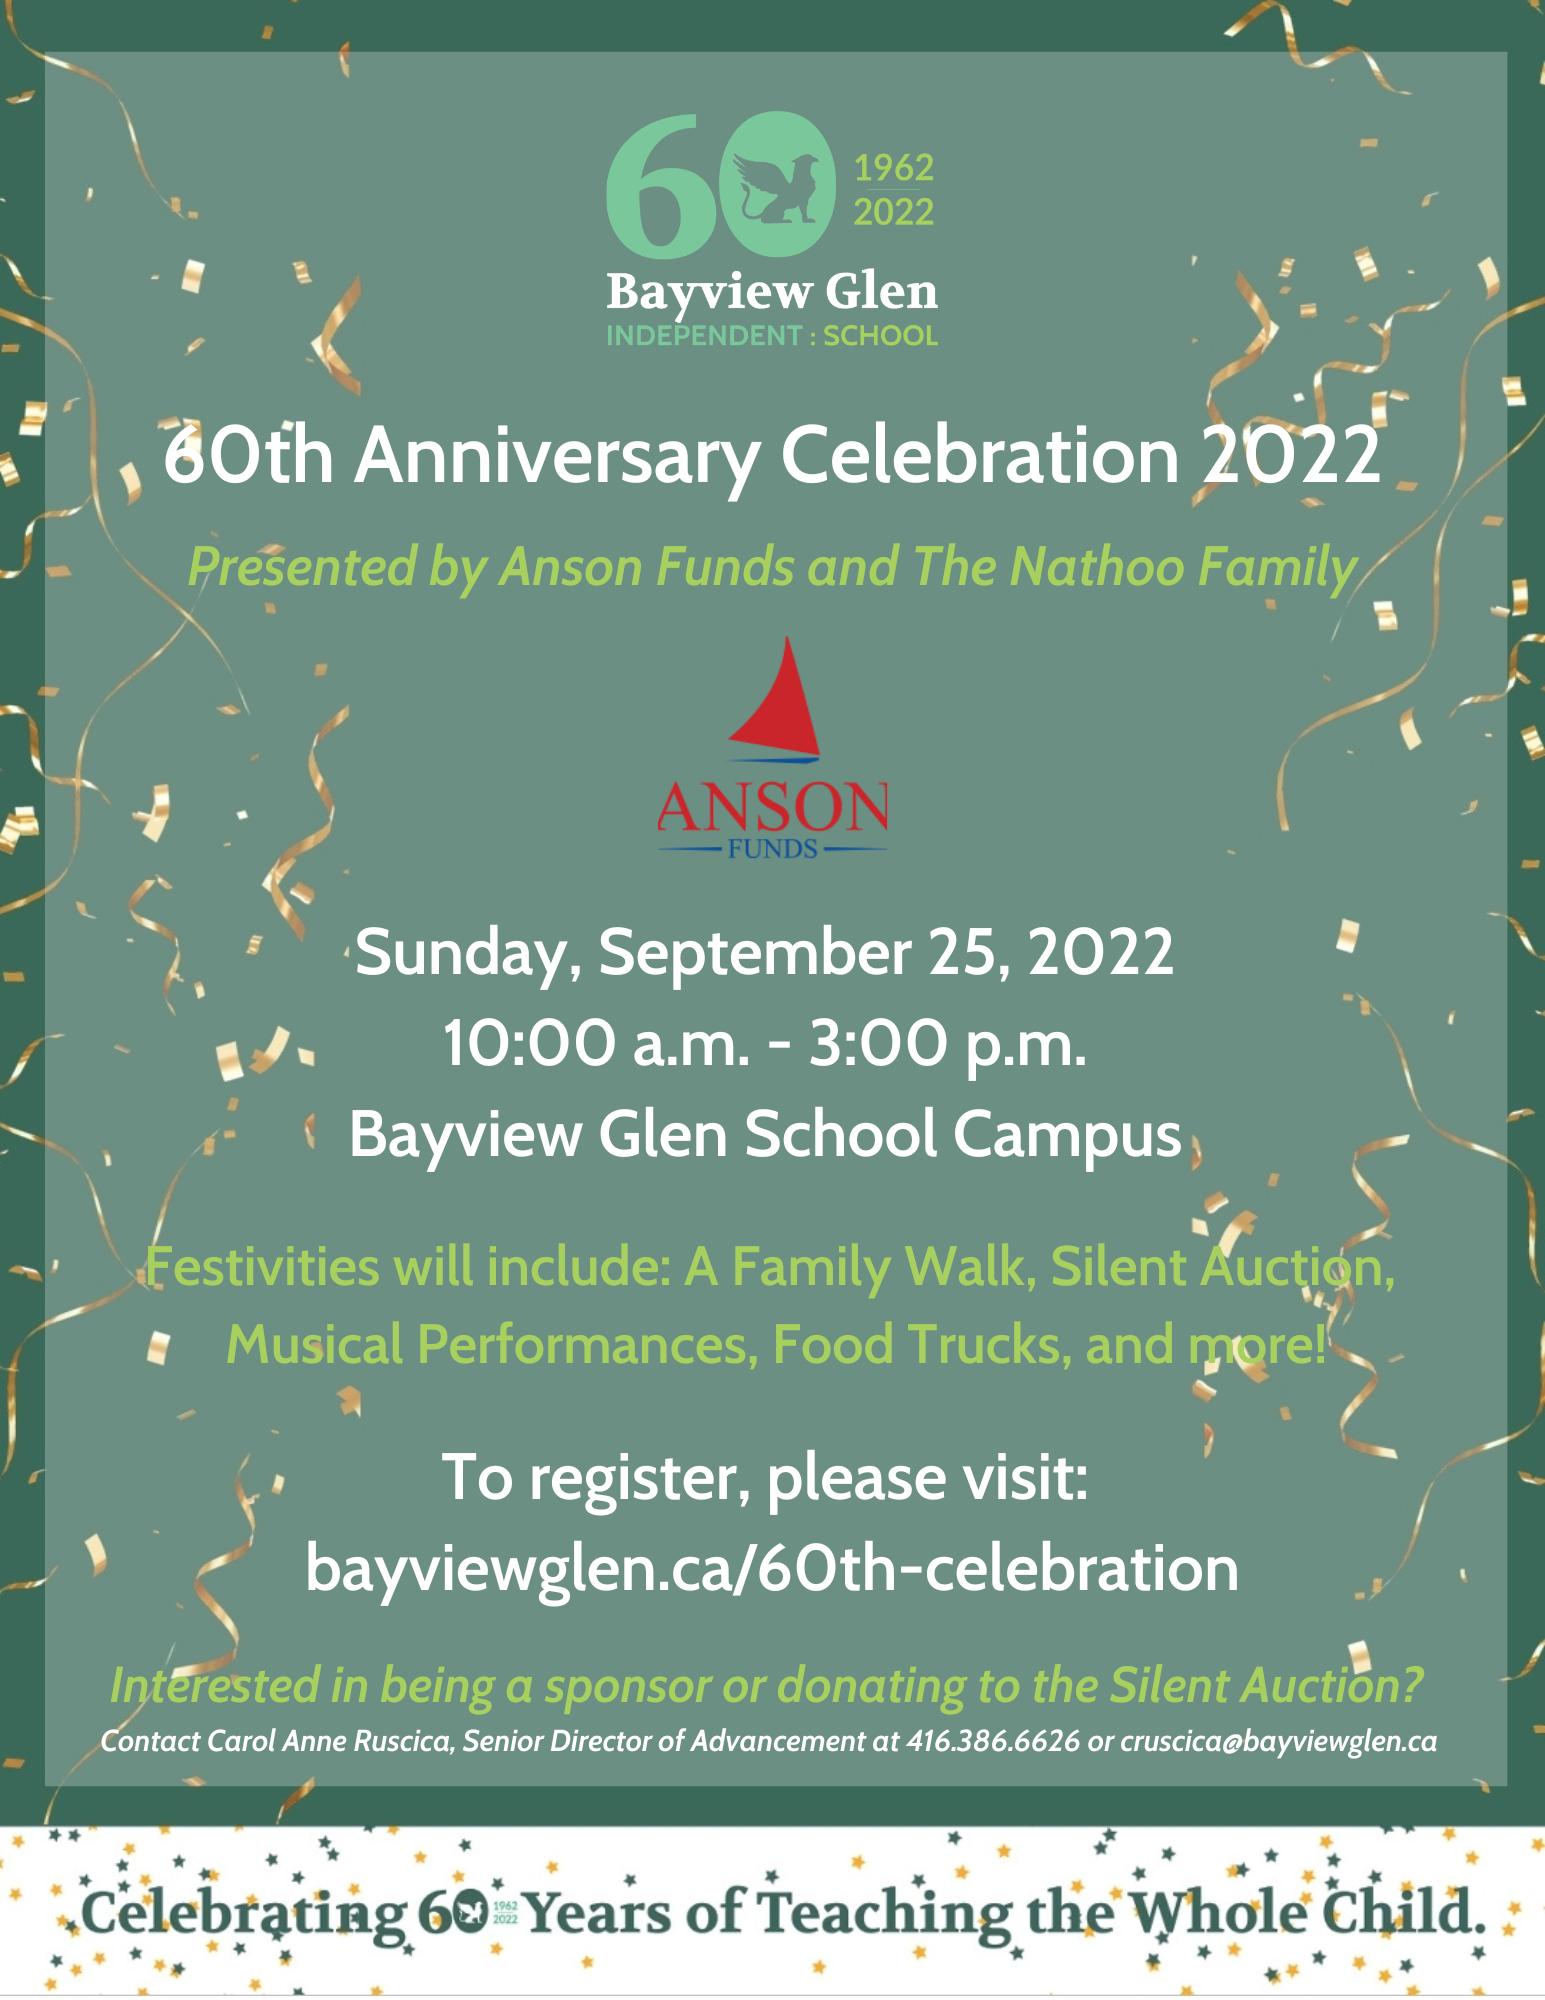 Join Us for the Bayview Glen 60th Celebration 2022